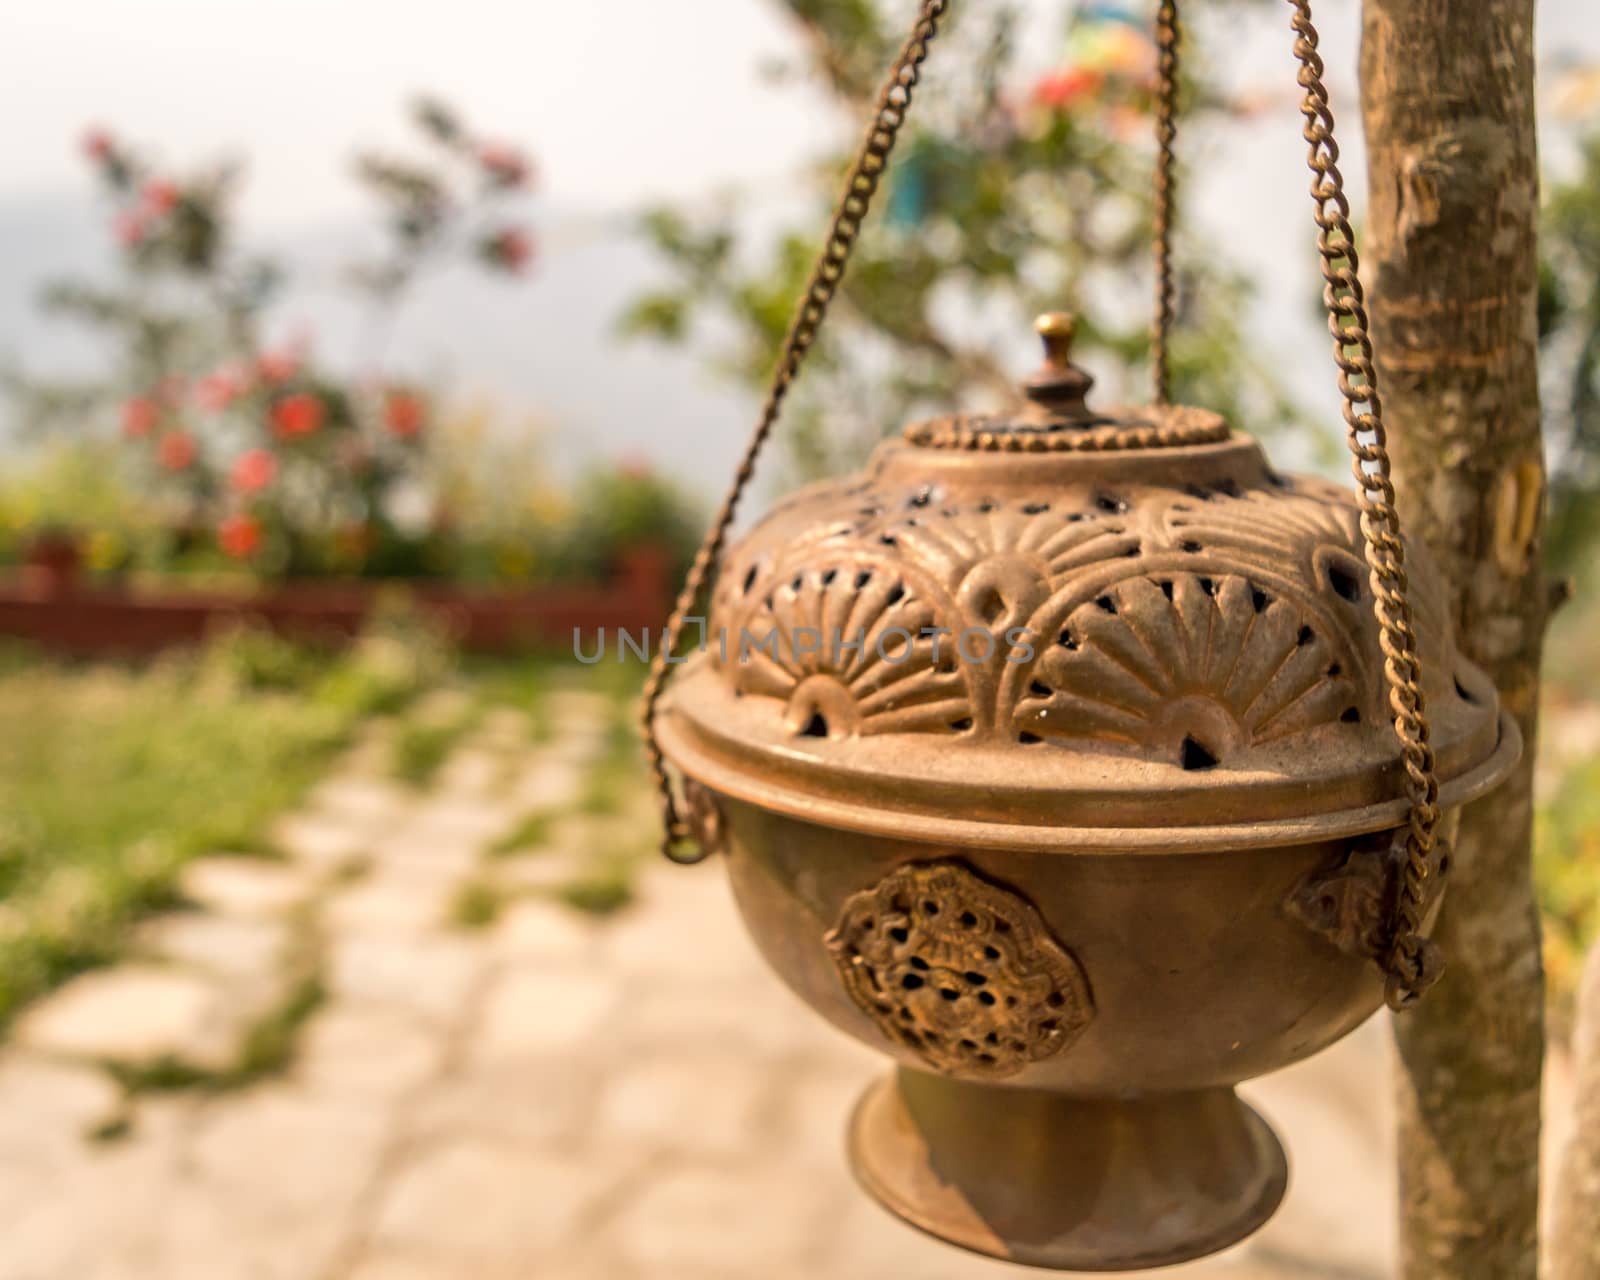 Metal Dhoop Batti Stand Hanging on a tree branch by sudiptabhowmick